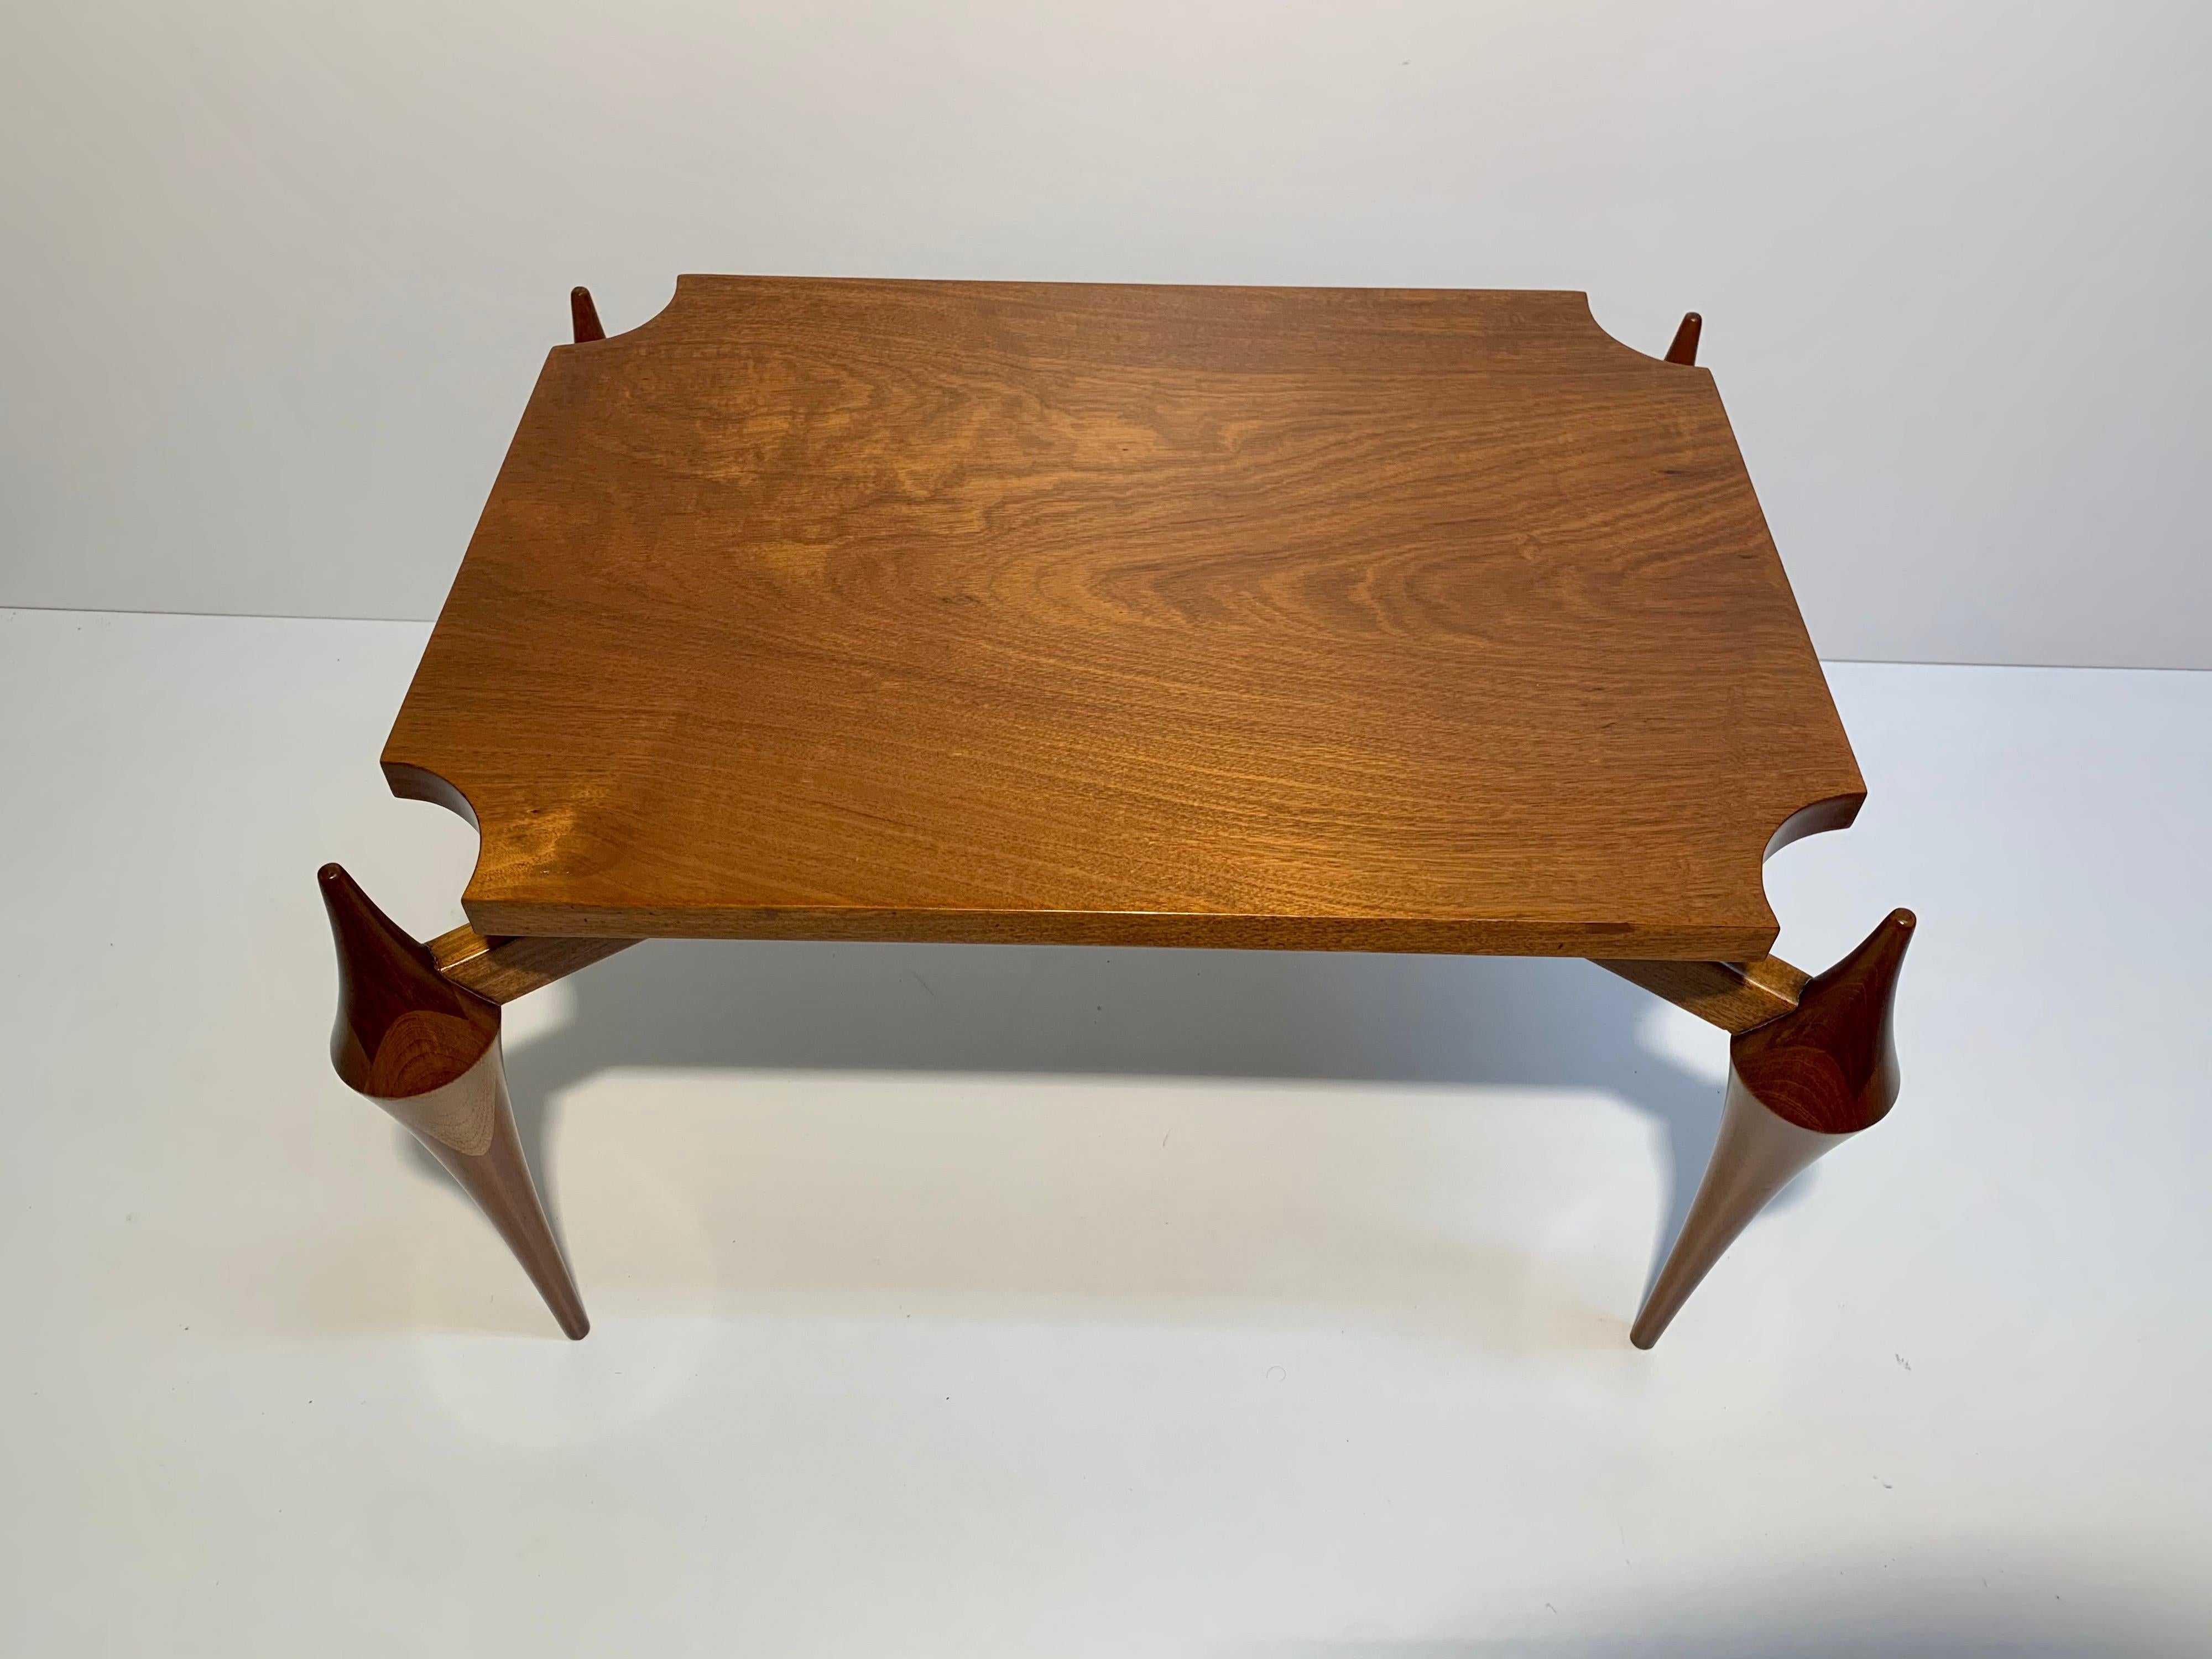 Spectacular side table made of mahogany in the 60s. Impeccable craftsmanship in its rocket-style legs, without a doubt a unique piece that we may not have in our gallery again.